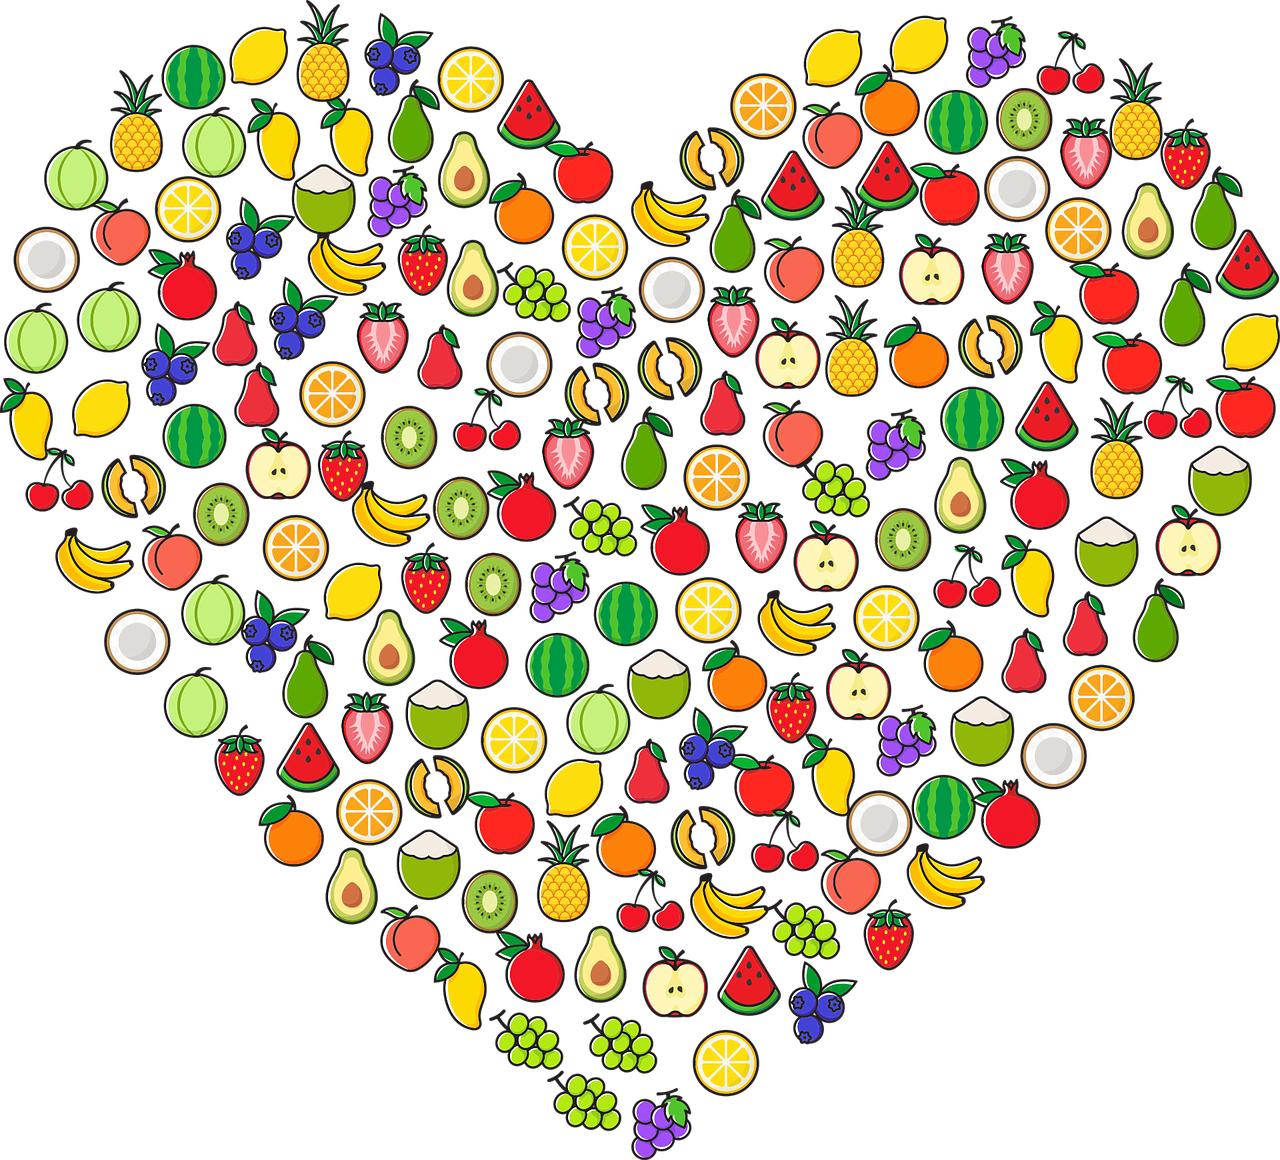 A heart of fruit. I think this is my favorite image!